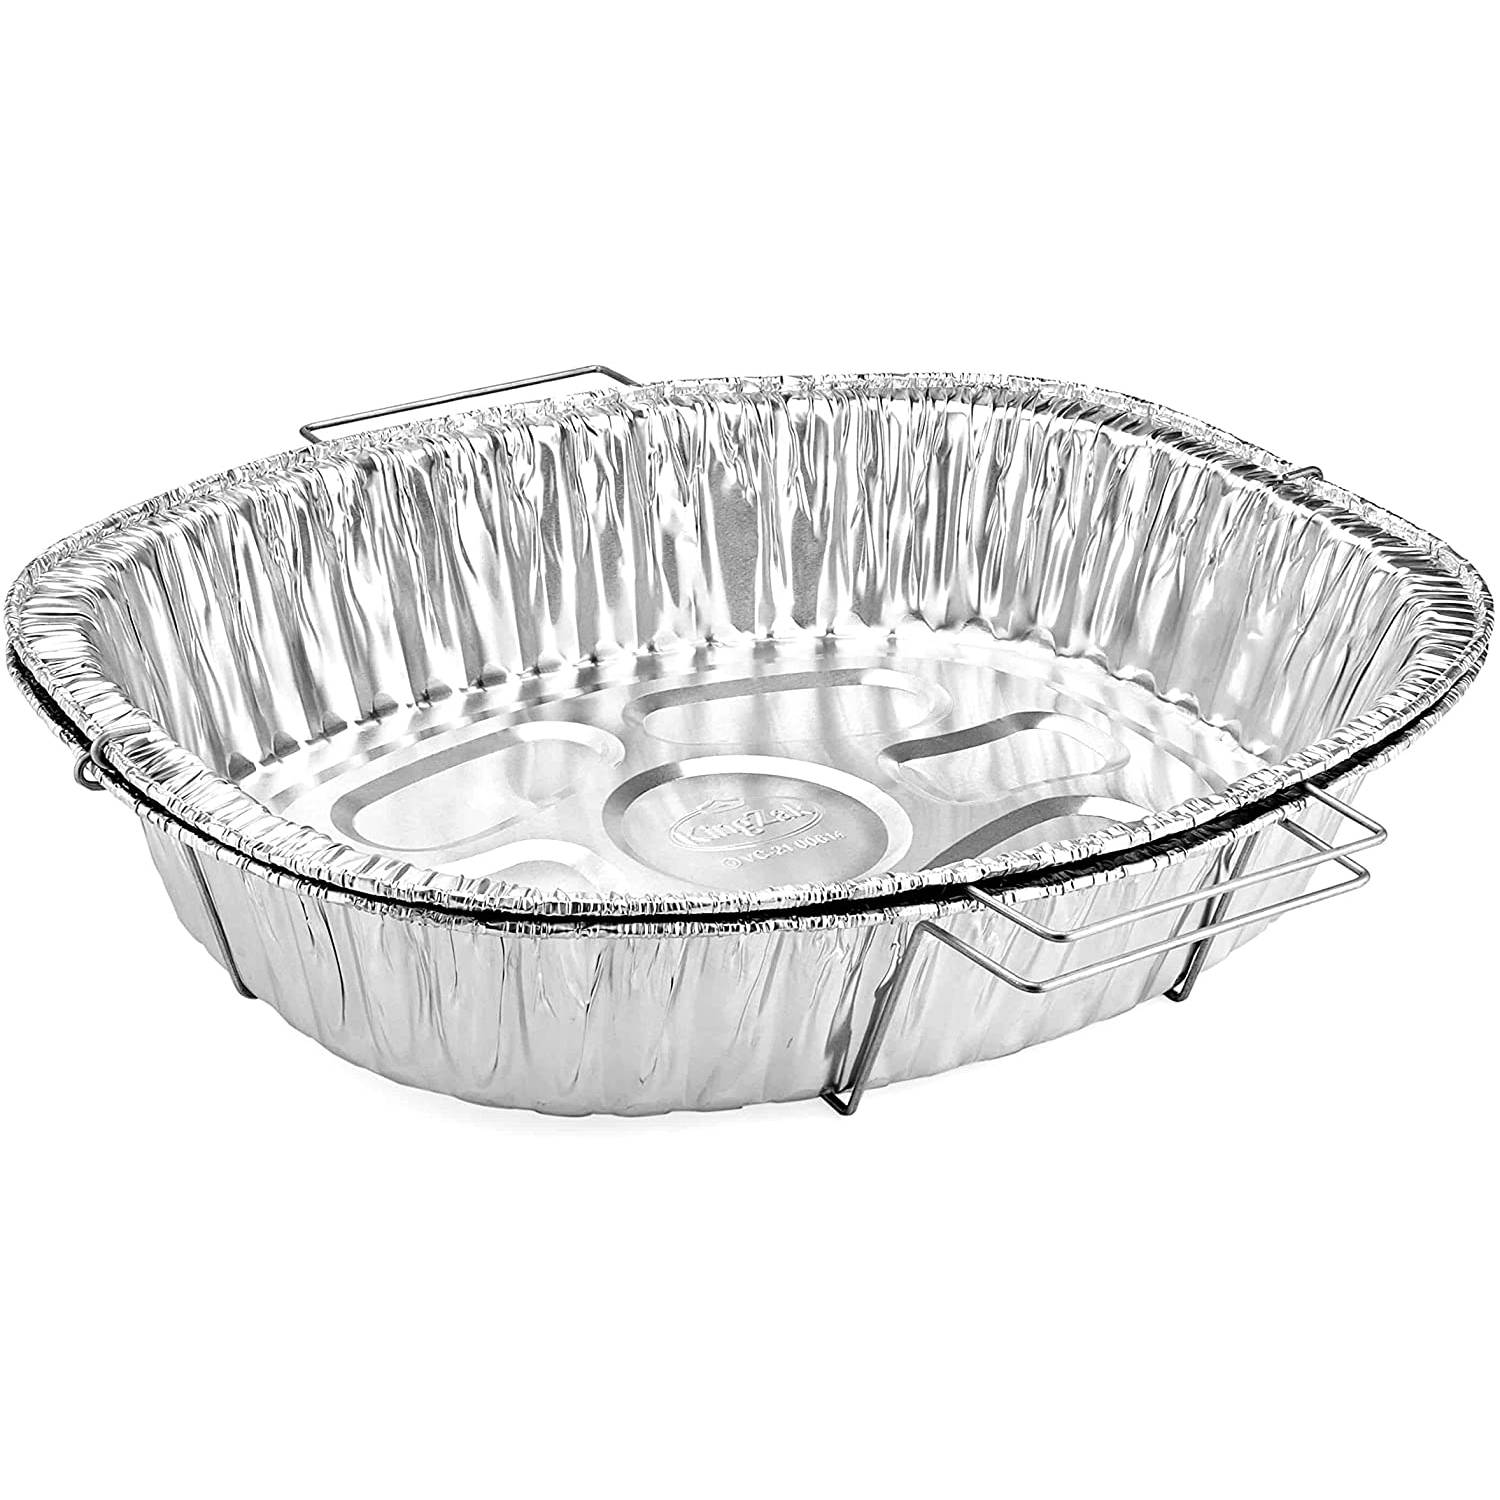 Durable Disposable Aluminum Foil Steam Roaster Baking Pans, Deep, Heavy  Duty Baking Roasting Broiling 20 x 13 x 3 inches Thanksgiving Turkey Dinner